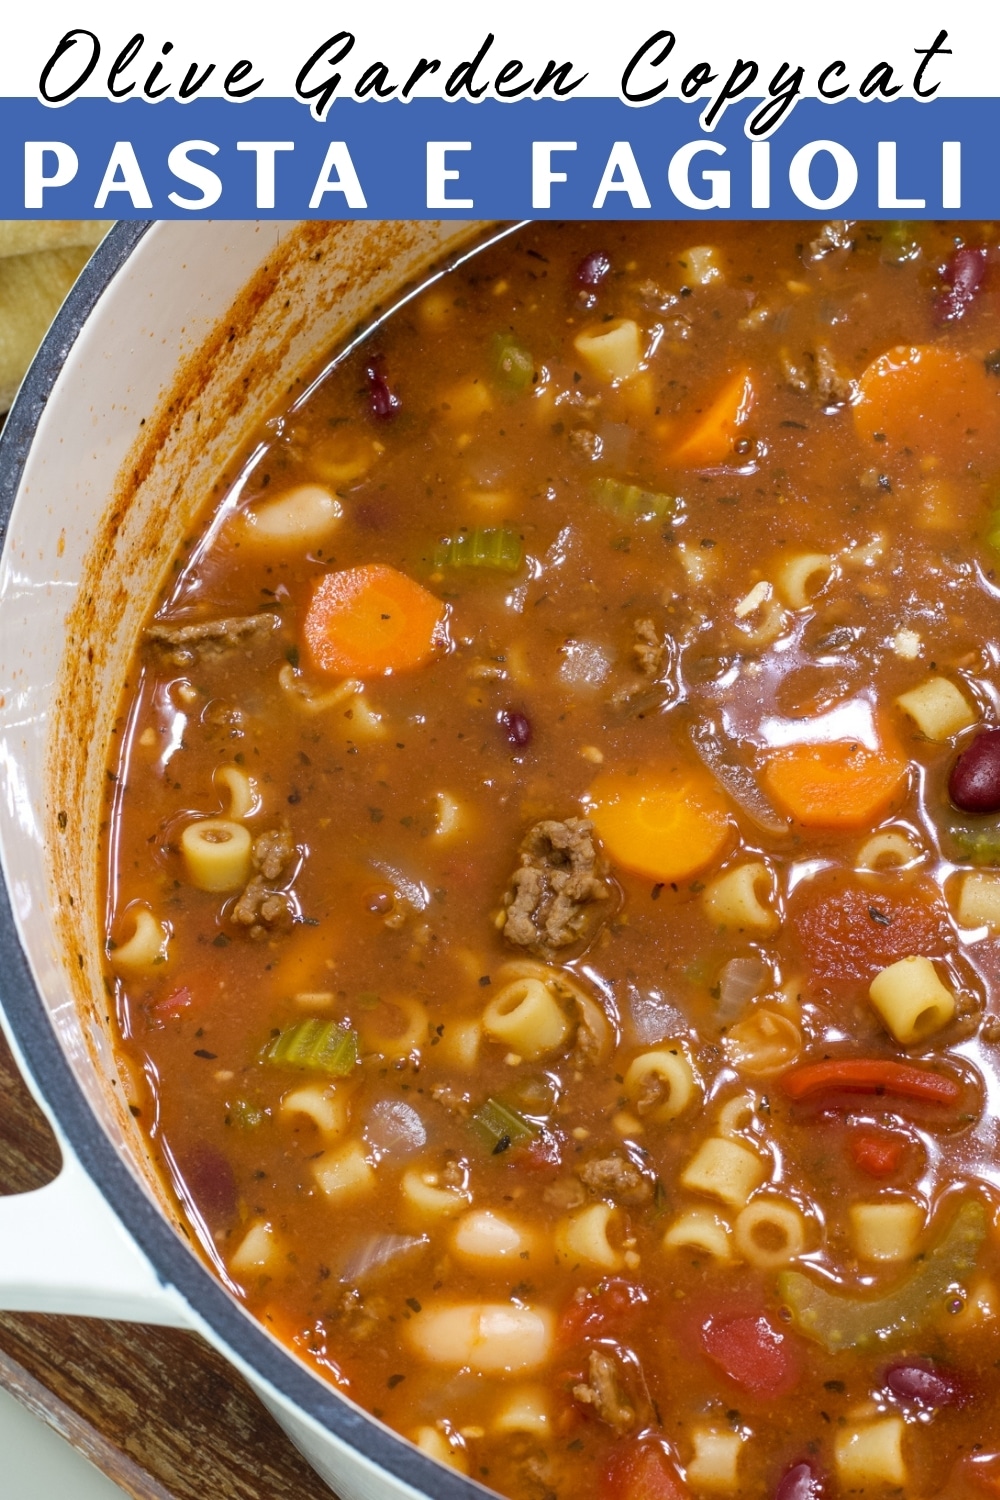 Craving Olive Garden Pasta e Fagioli? Try this one-pot recipe with ditalini pasta and lean ground beef. A delicious and hassle-free dinner option. via @mindyscookingobsession